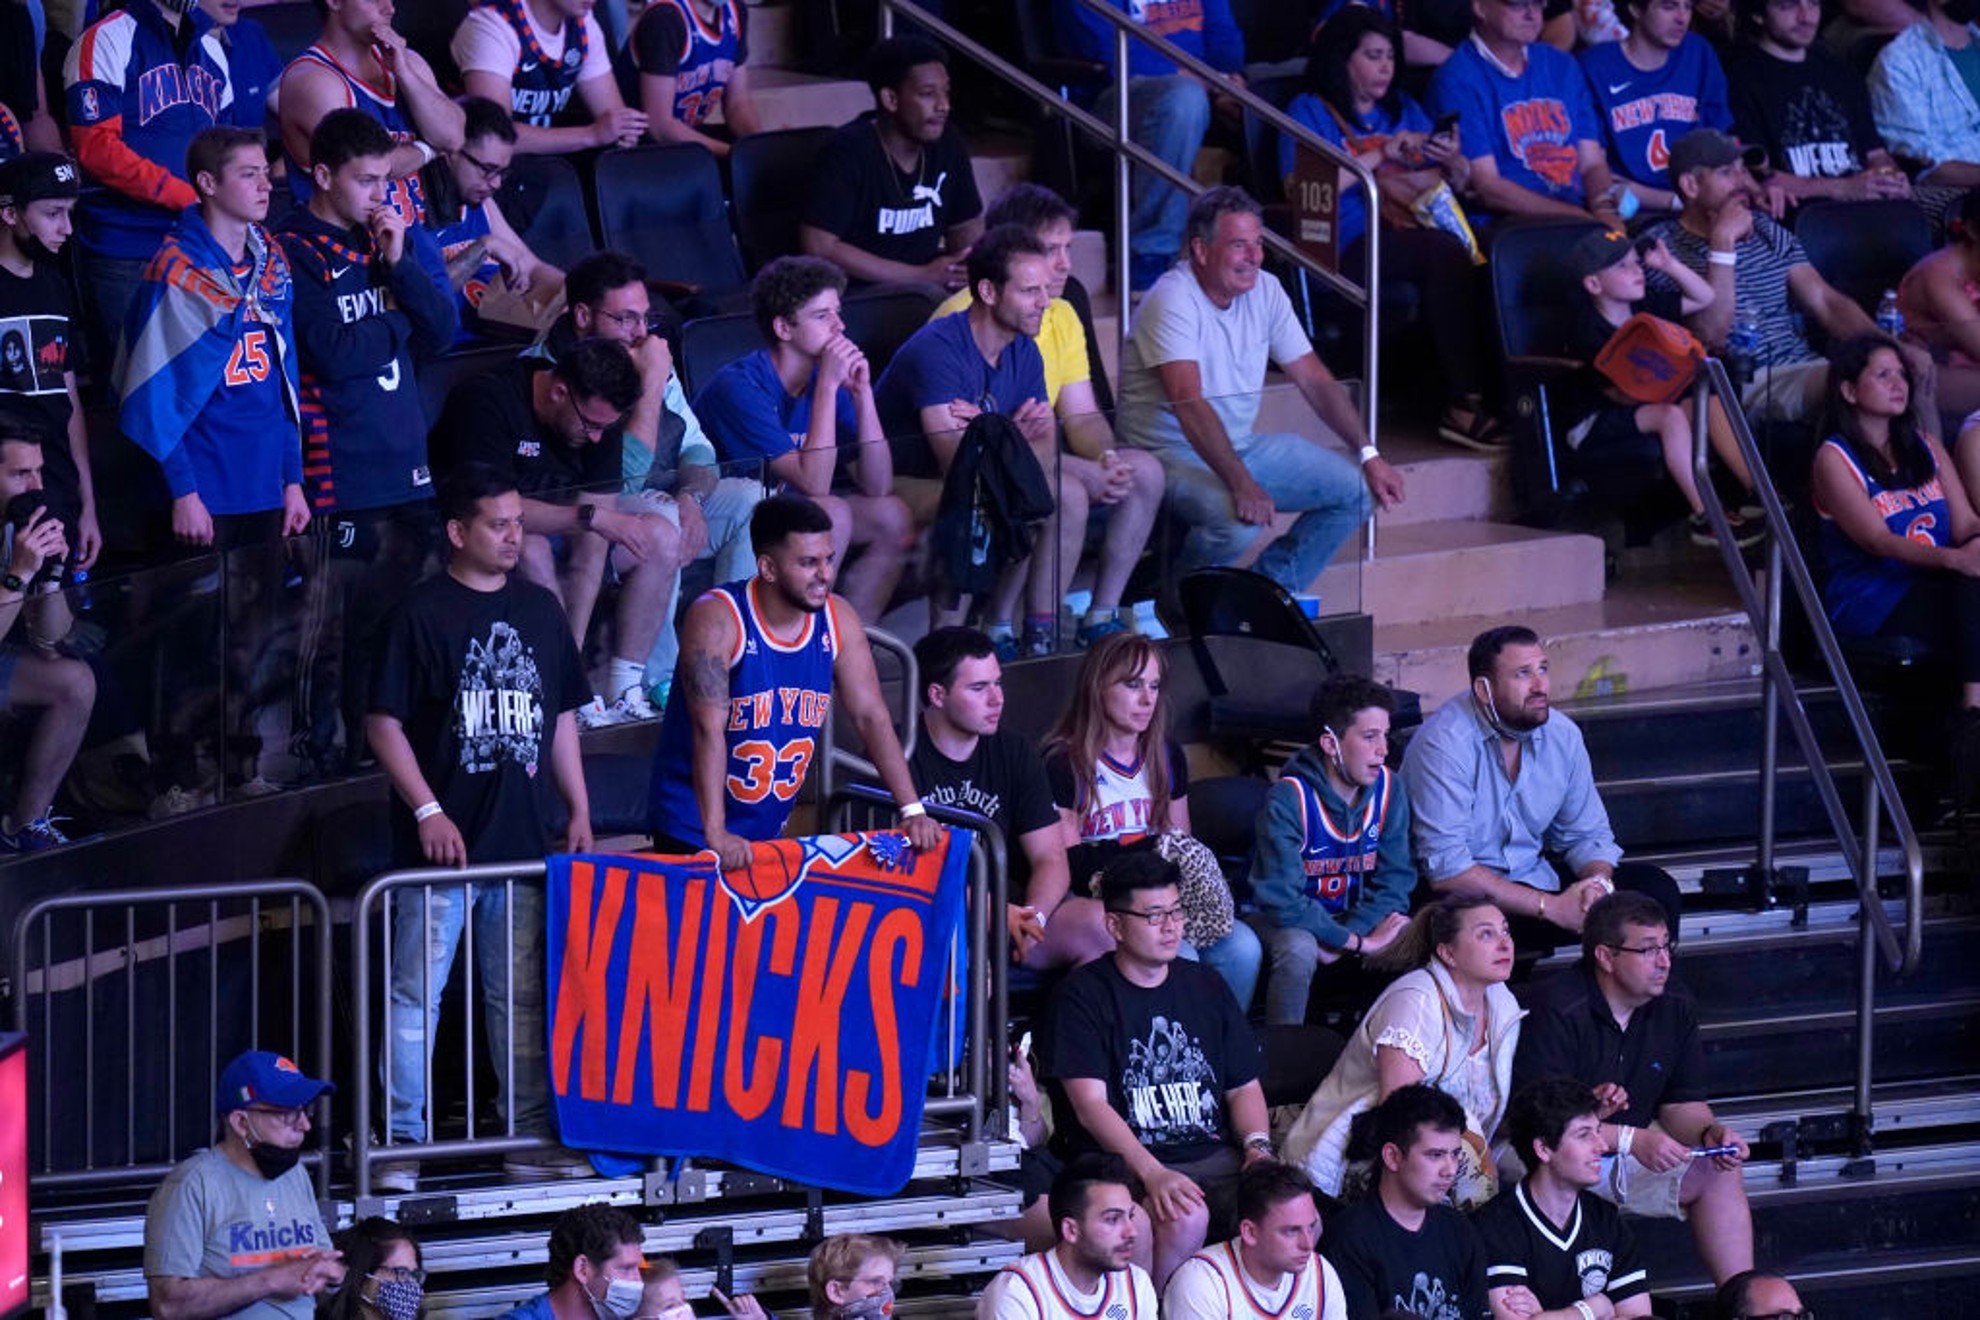 Knicks fans at Madison Square Garden/GETTY IMAGES.